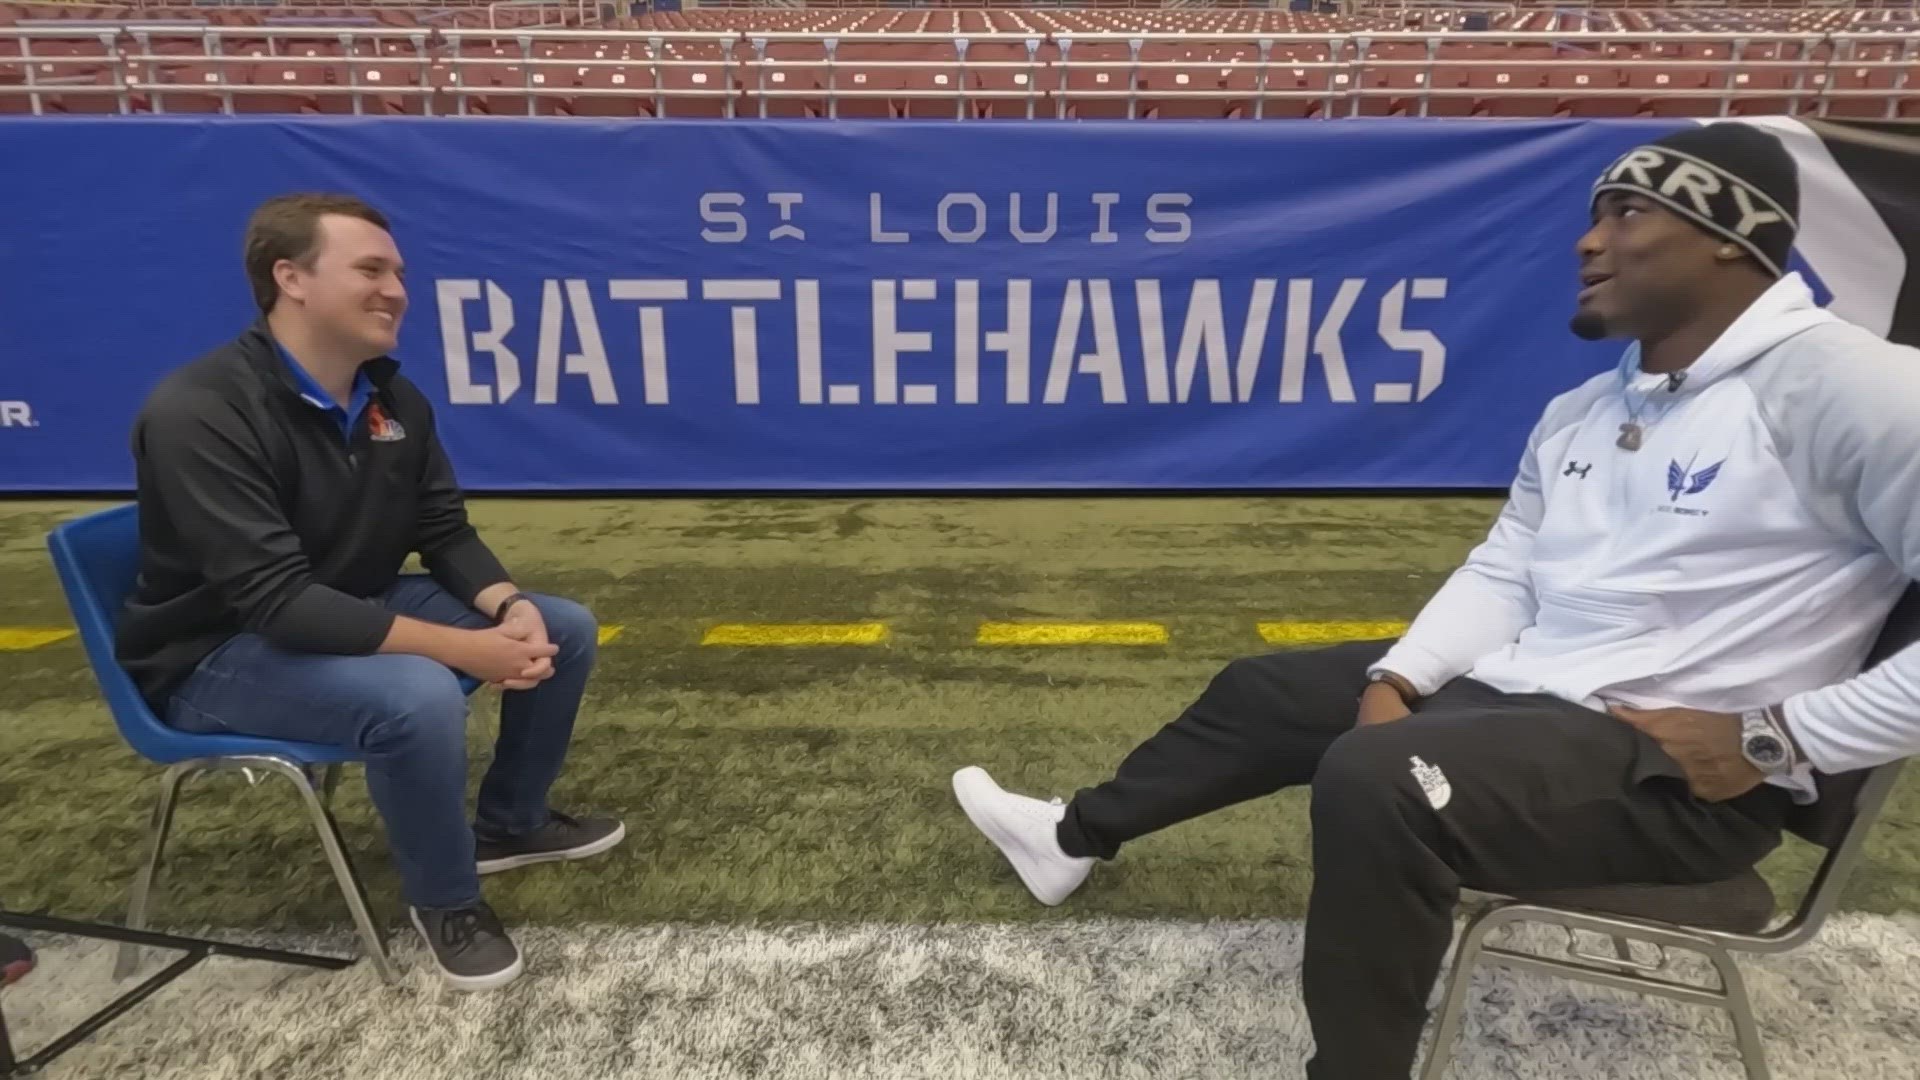 Everything you need to know about the St. Louis BattleHawks